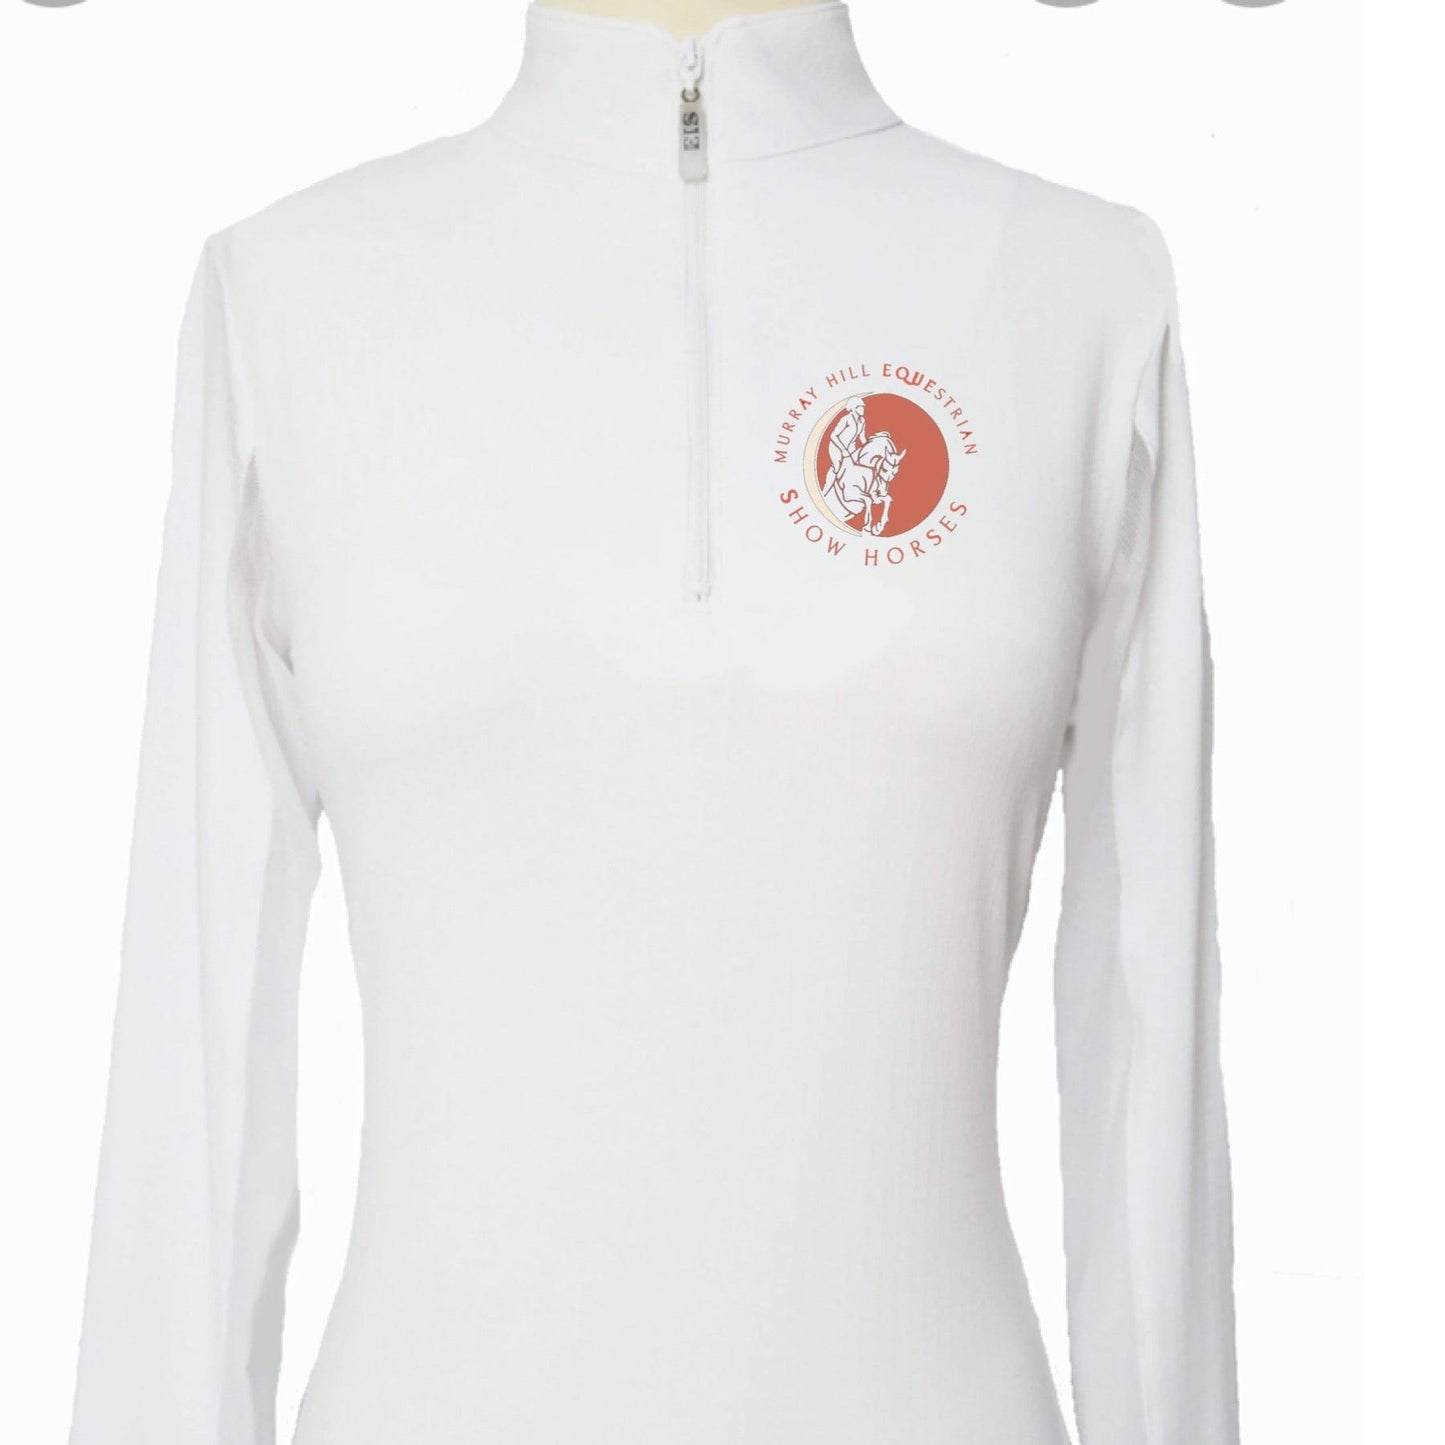 Equestrian Team Apparel Murray Hill Equestrian Sun Shirt equestrian team apparel online tack store mobile tack store custom farm apparel custom show stable clothing equestrian lifestyle horse show clothing riding clothes horses equestrian tack store